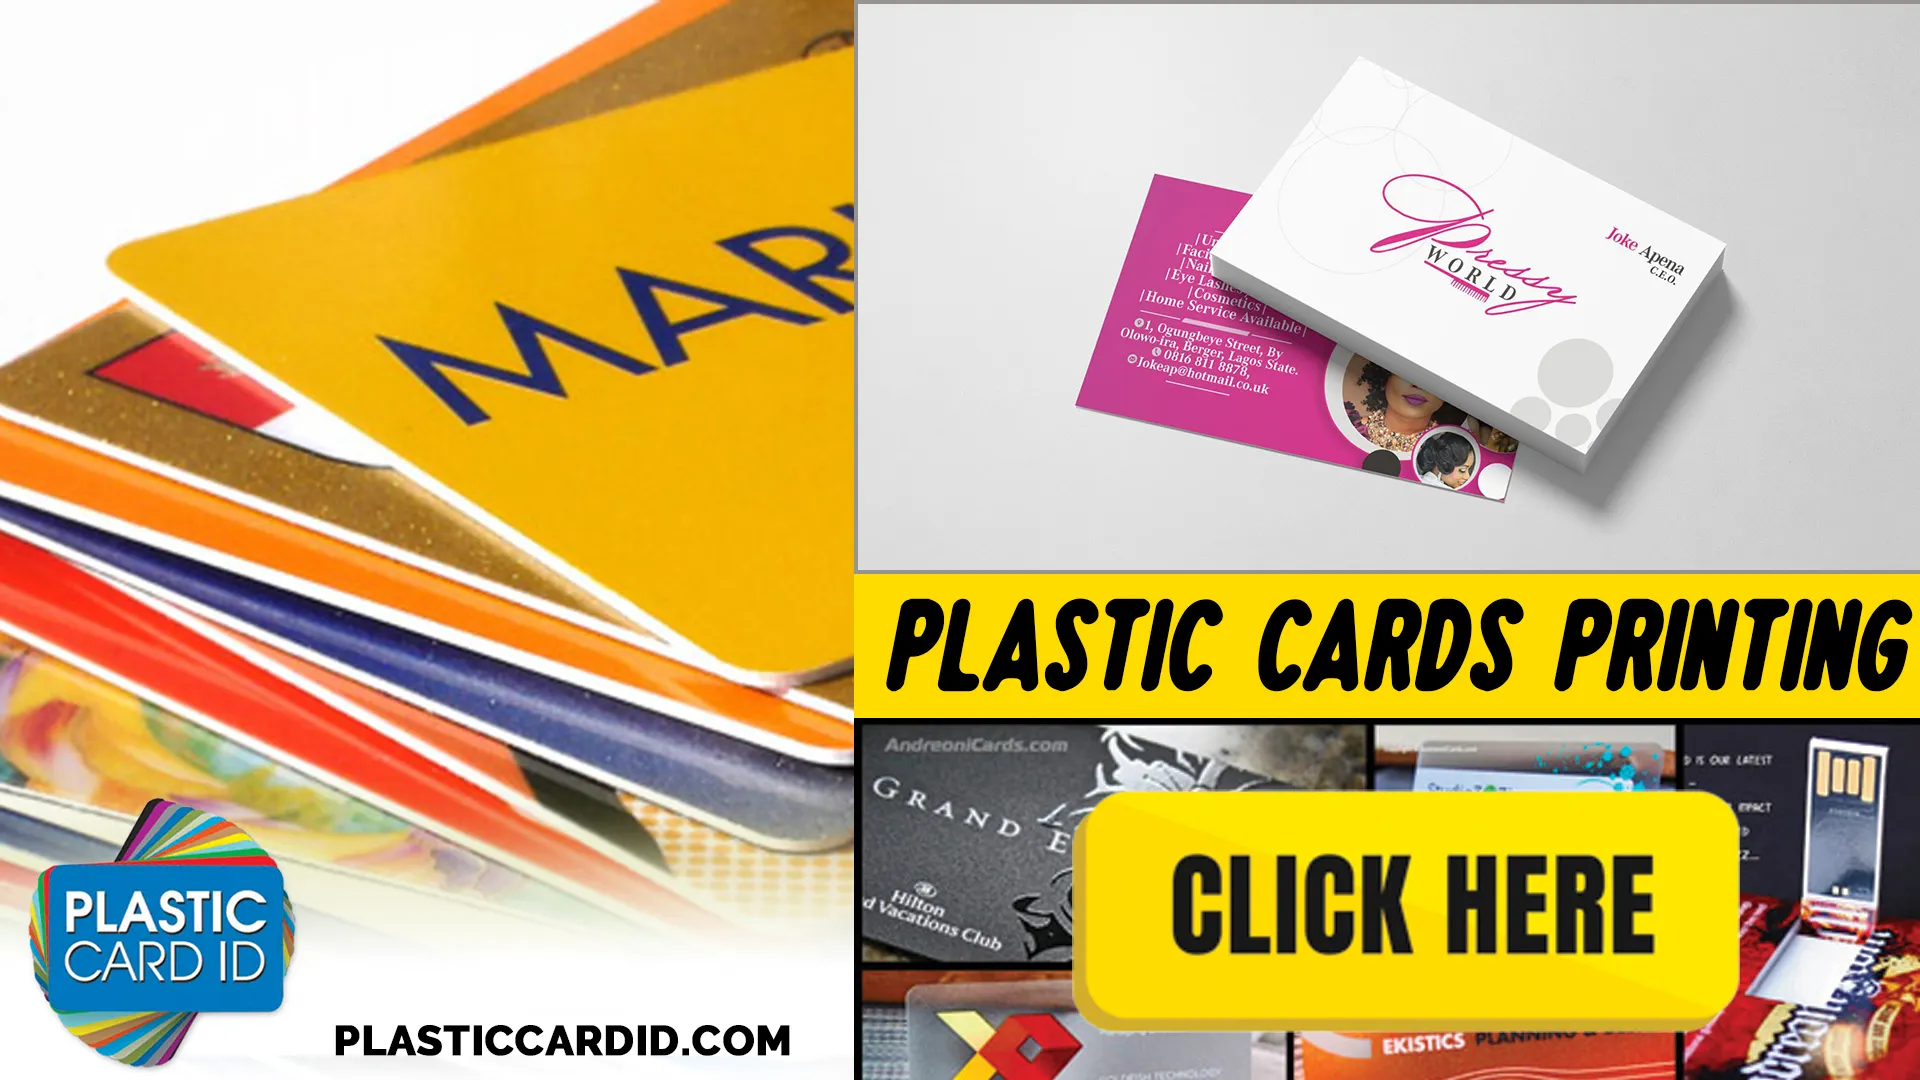 Understanding the Life Cycle of PVC Cards